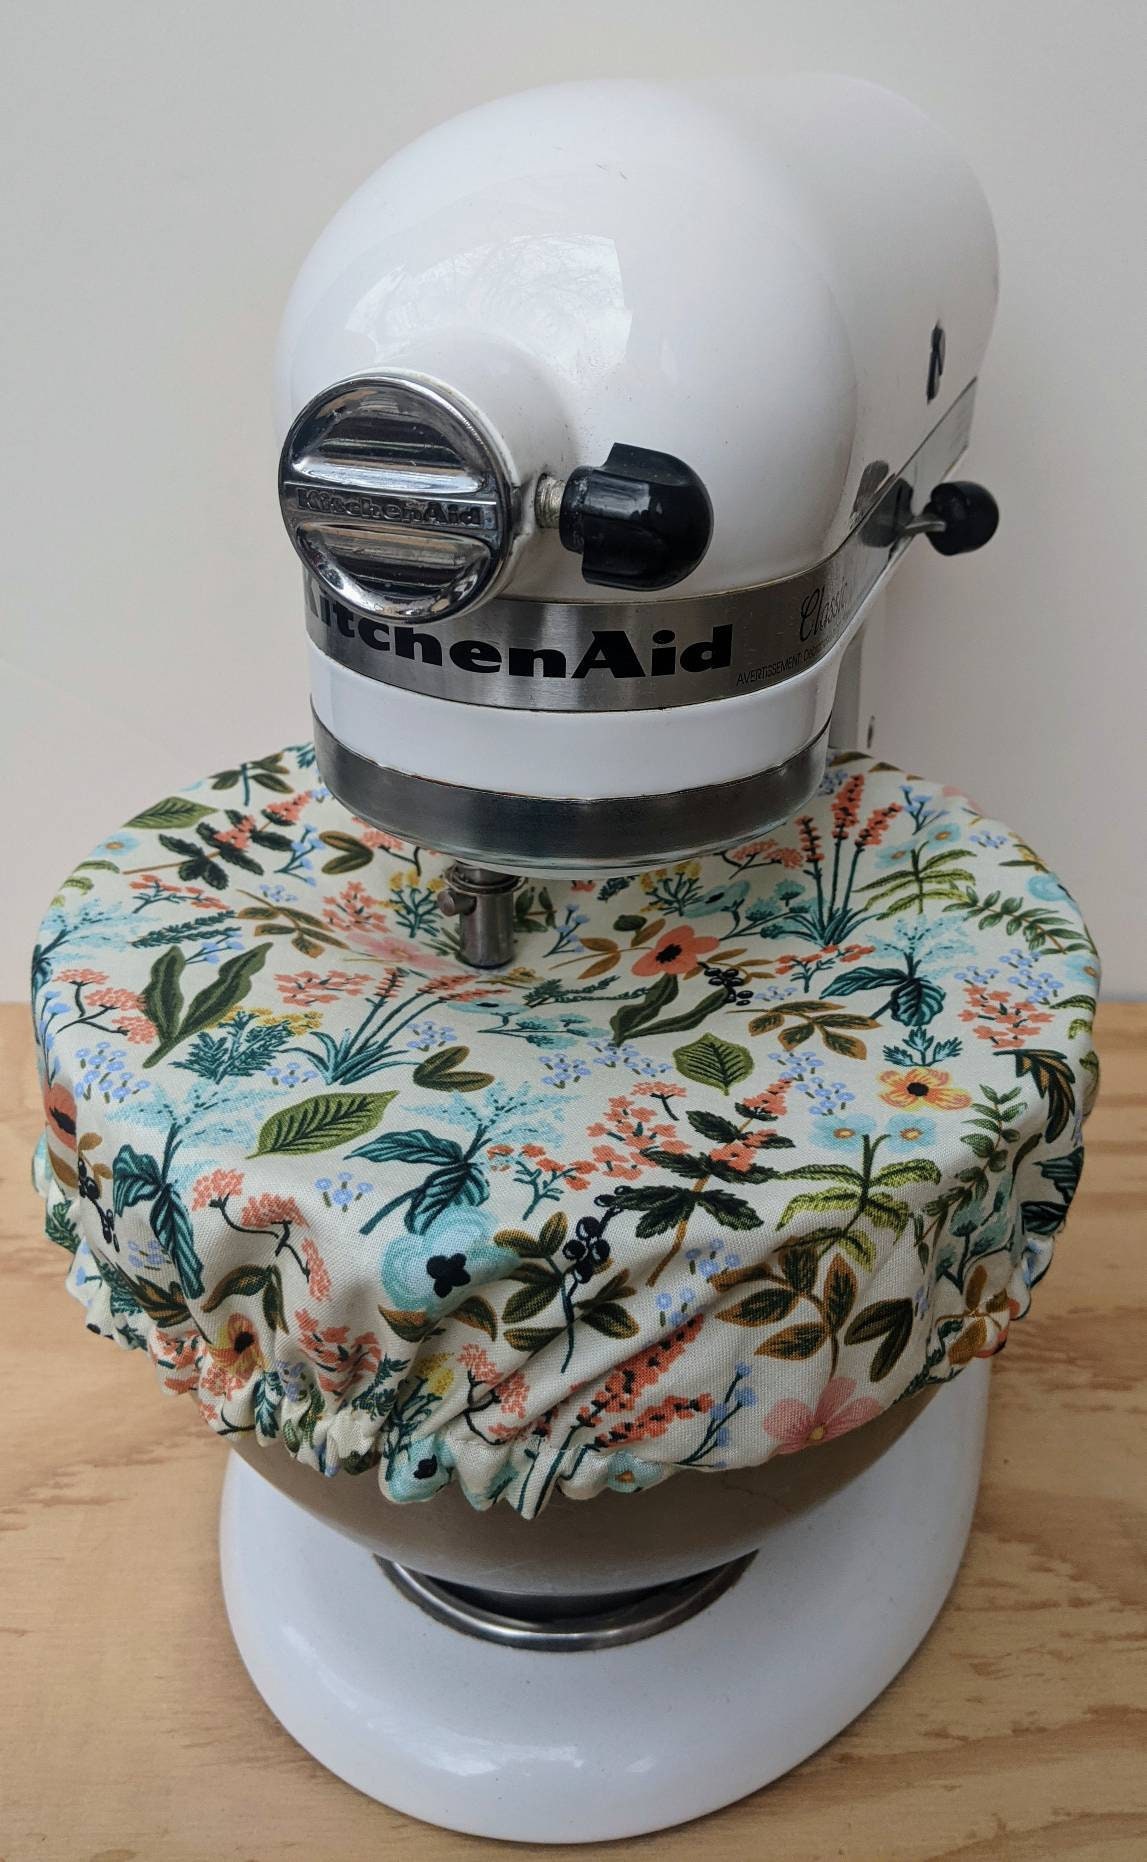 Stand Mixer Cover Dustproof For Kitchen Aid, New Christmas Mixer